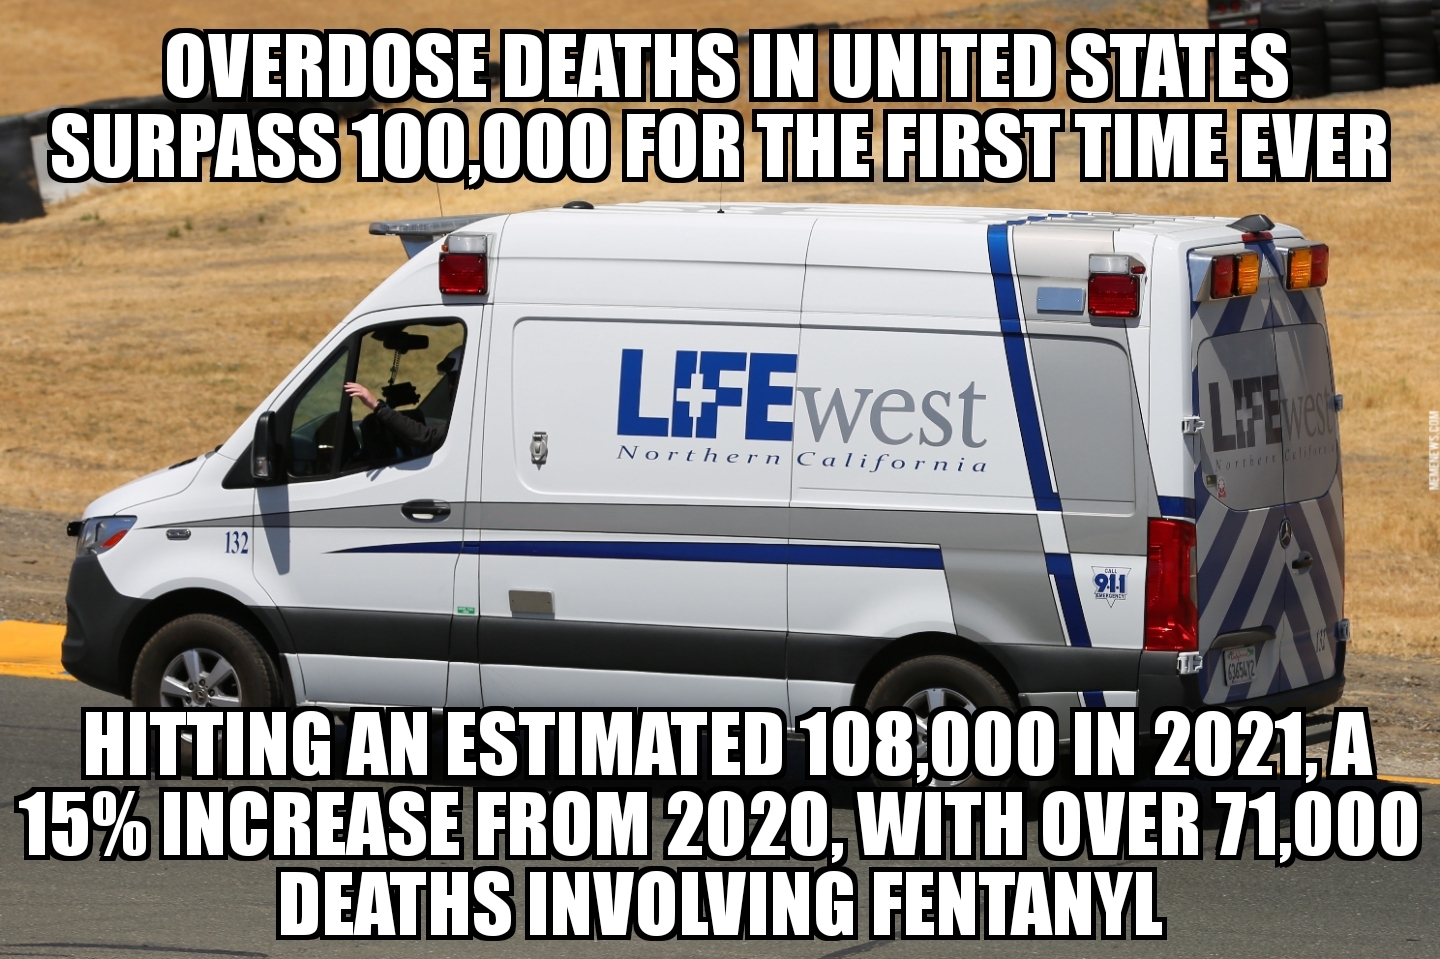 U.S. overdose deaths hit new record